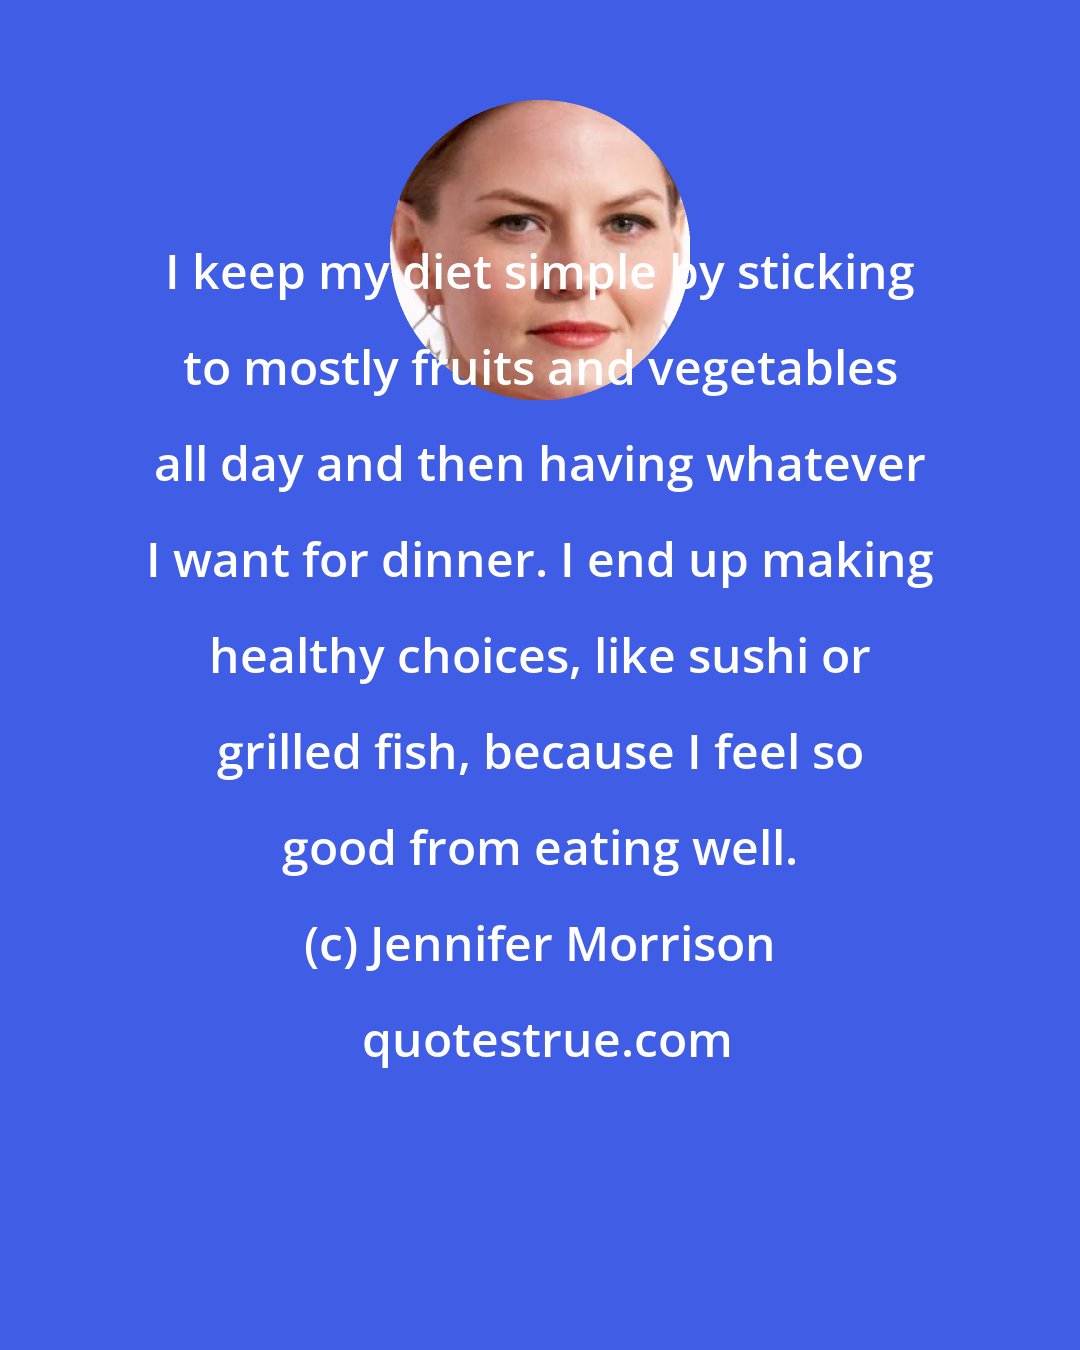 Jennifer Morrison: I keep my diet simple by sticking to mostly fruits and vegetables all day and then having whatever I want for dinner. I end up making healthy choices, like sushi or grilled fish, because I feel so good from eating well.